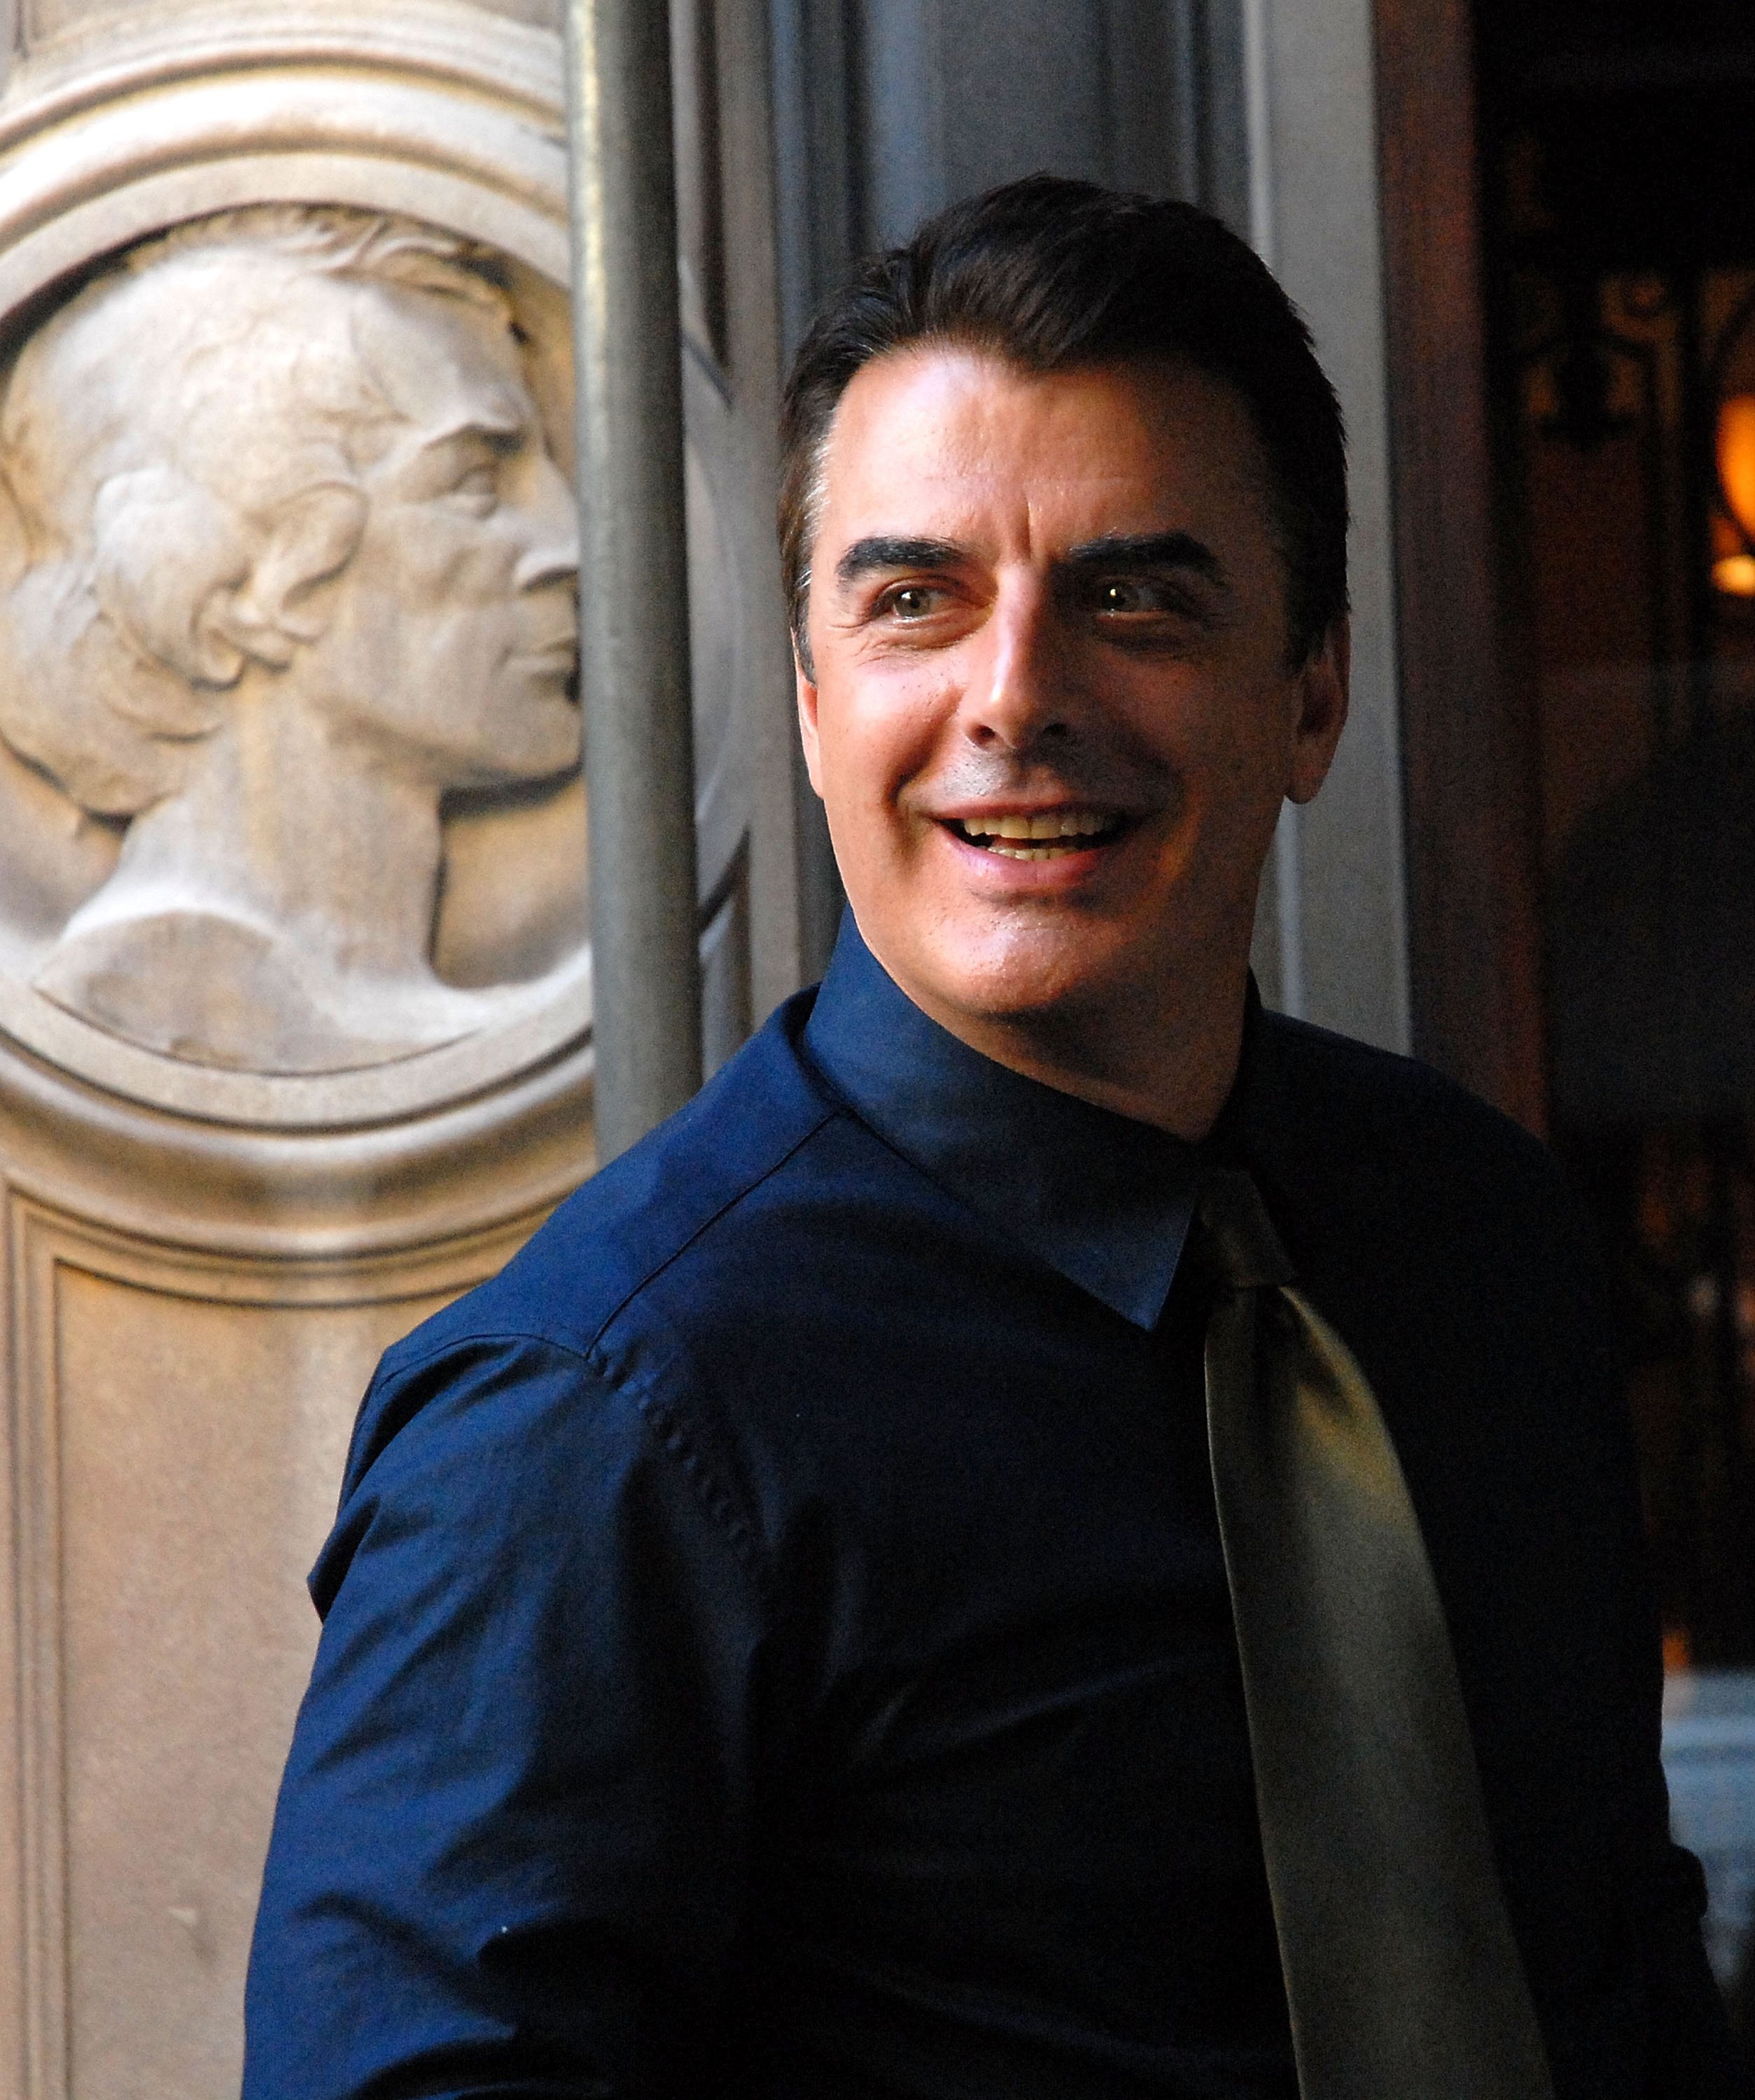 Chris Noth appears on location for 'Sex and the City' 